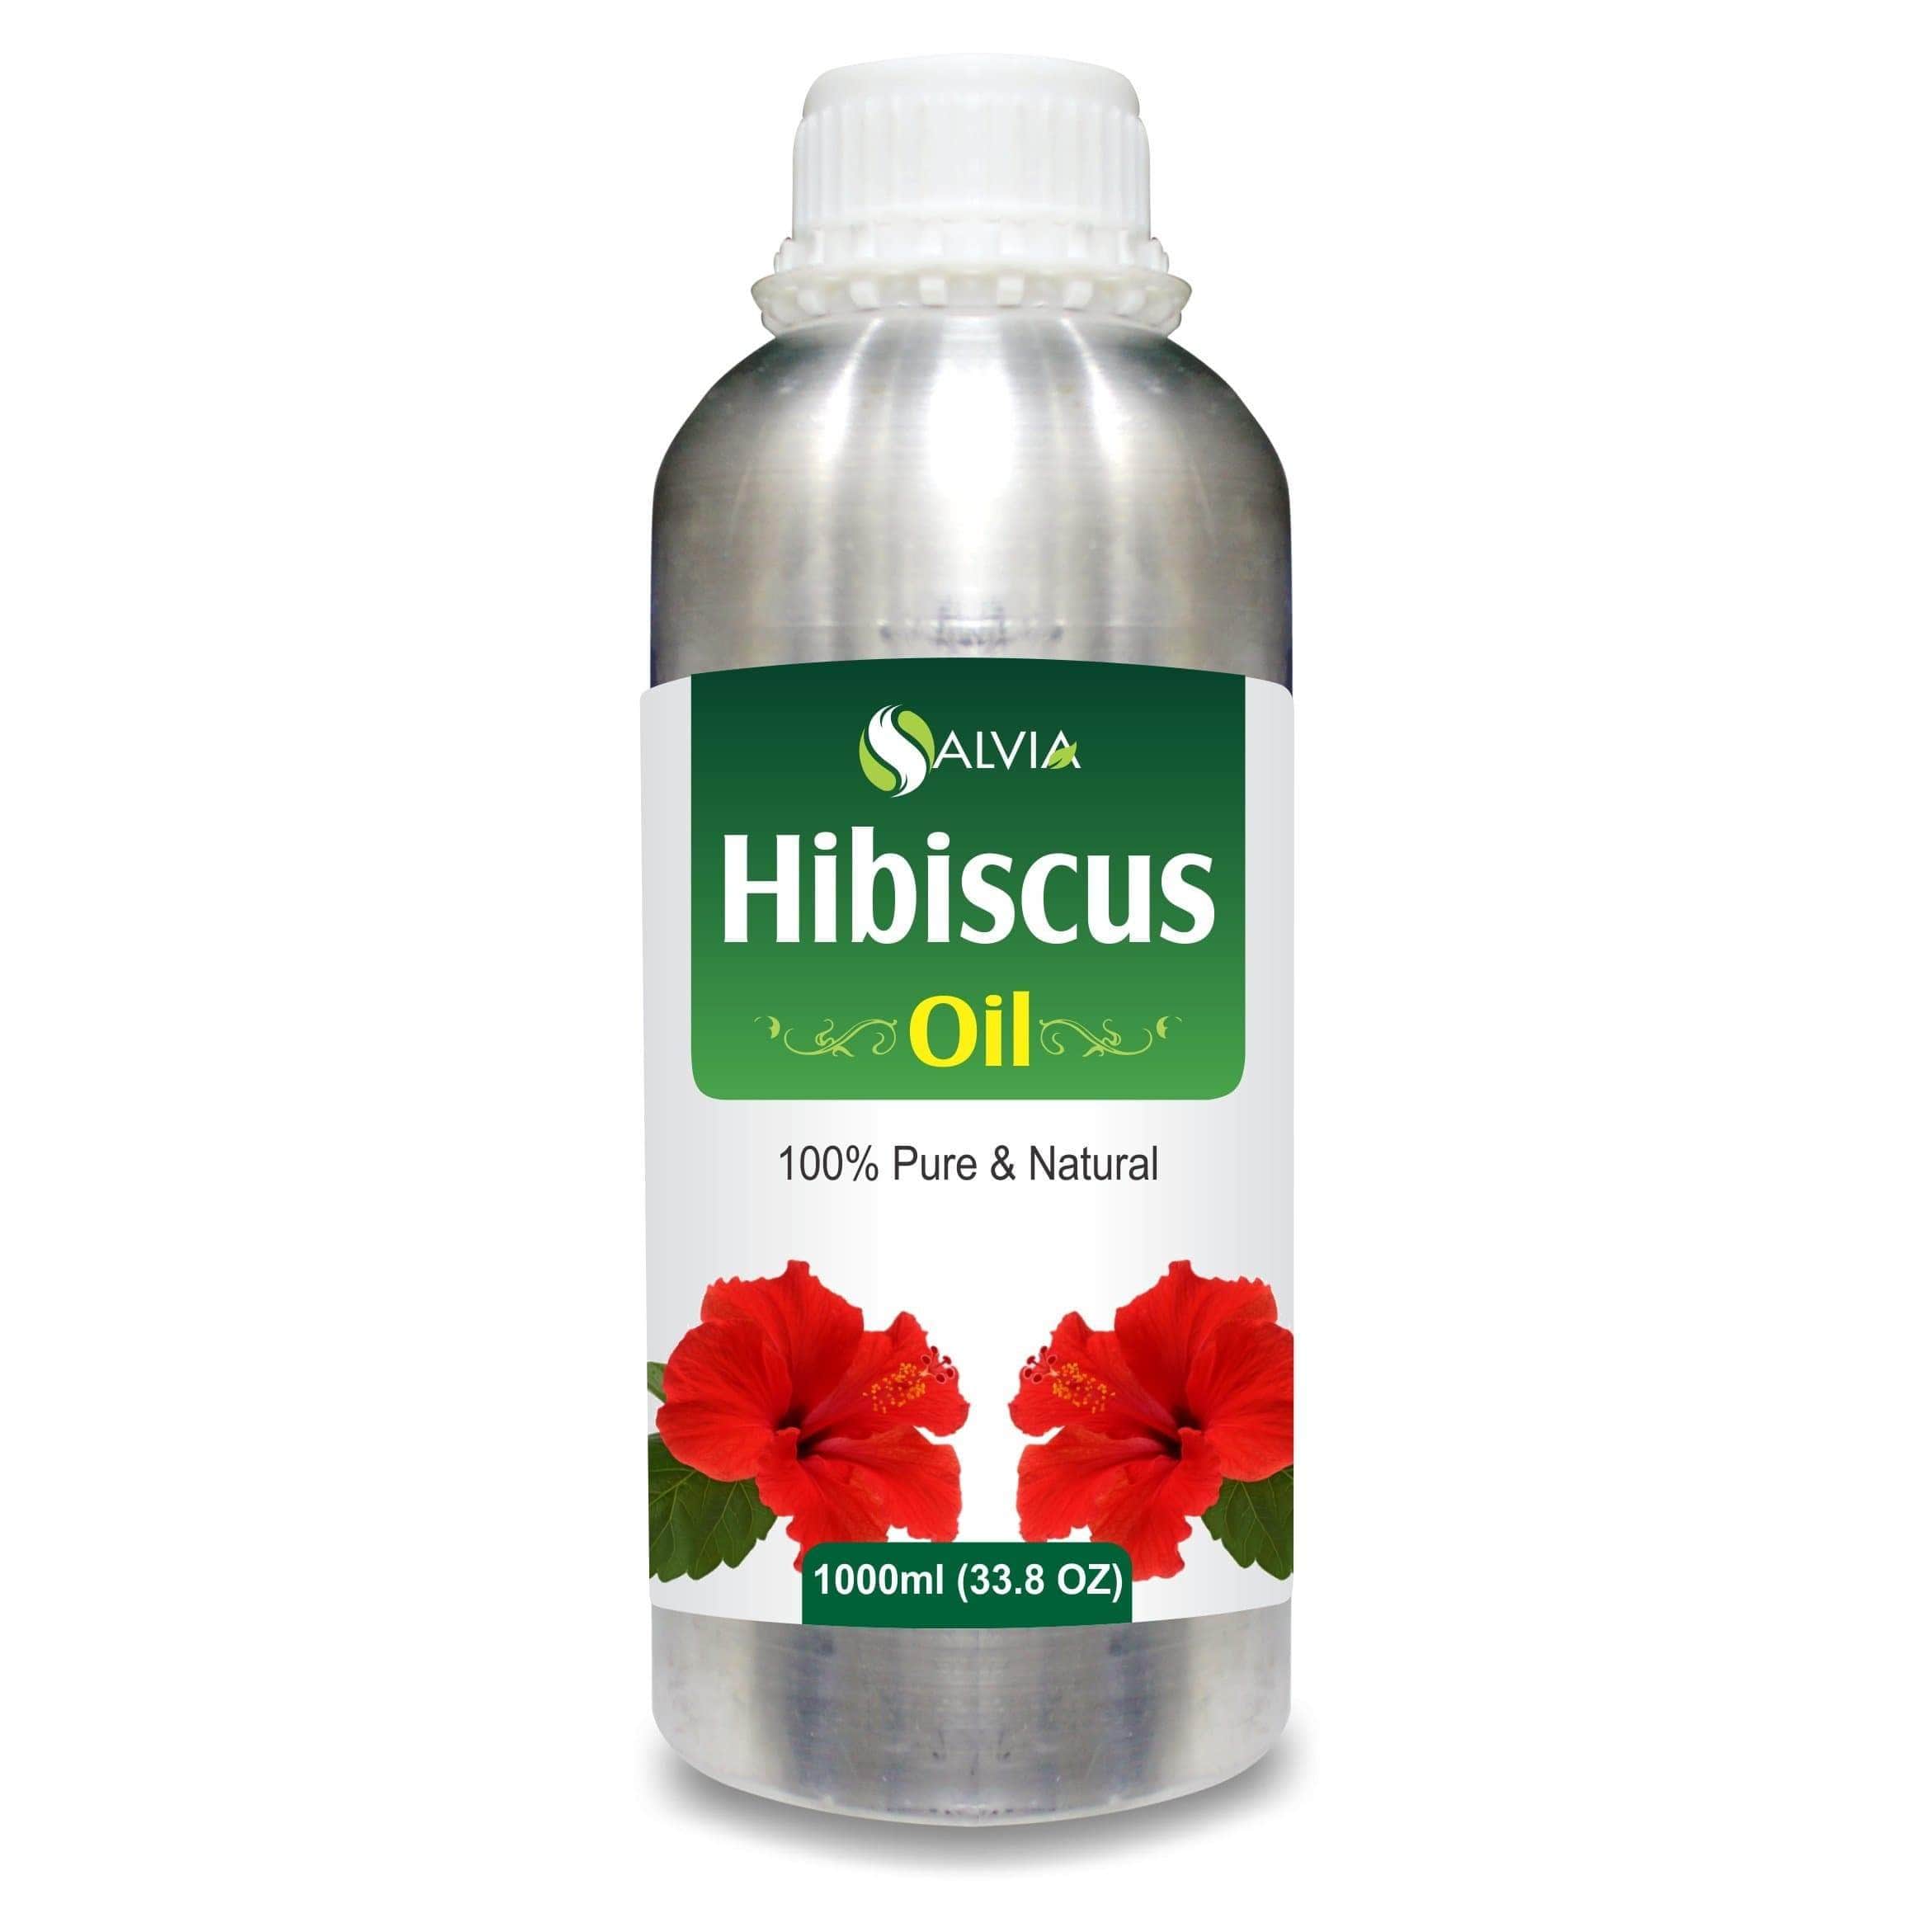 hibiscus oil for hair benefits